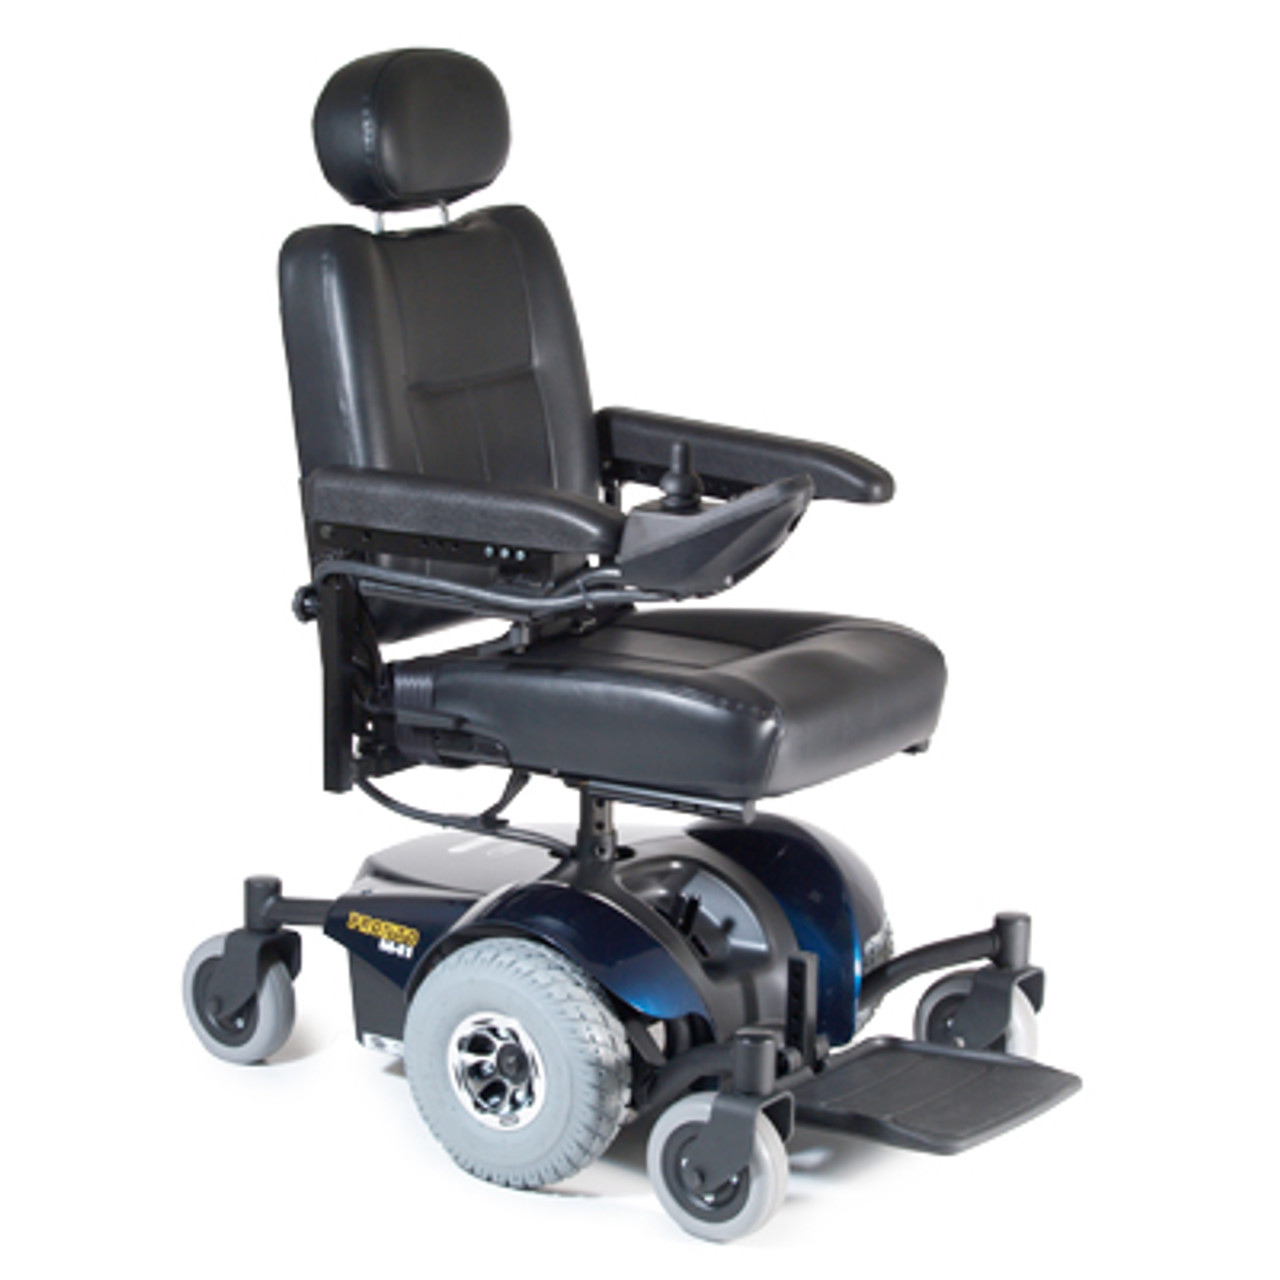 Pronto M41 Power Wheelchair - Office Style Seat by Invacare